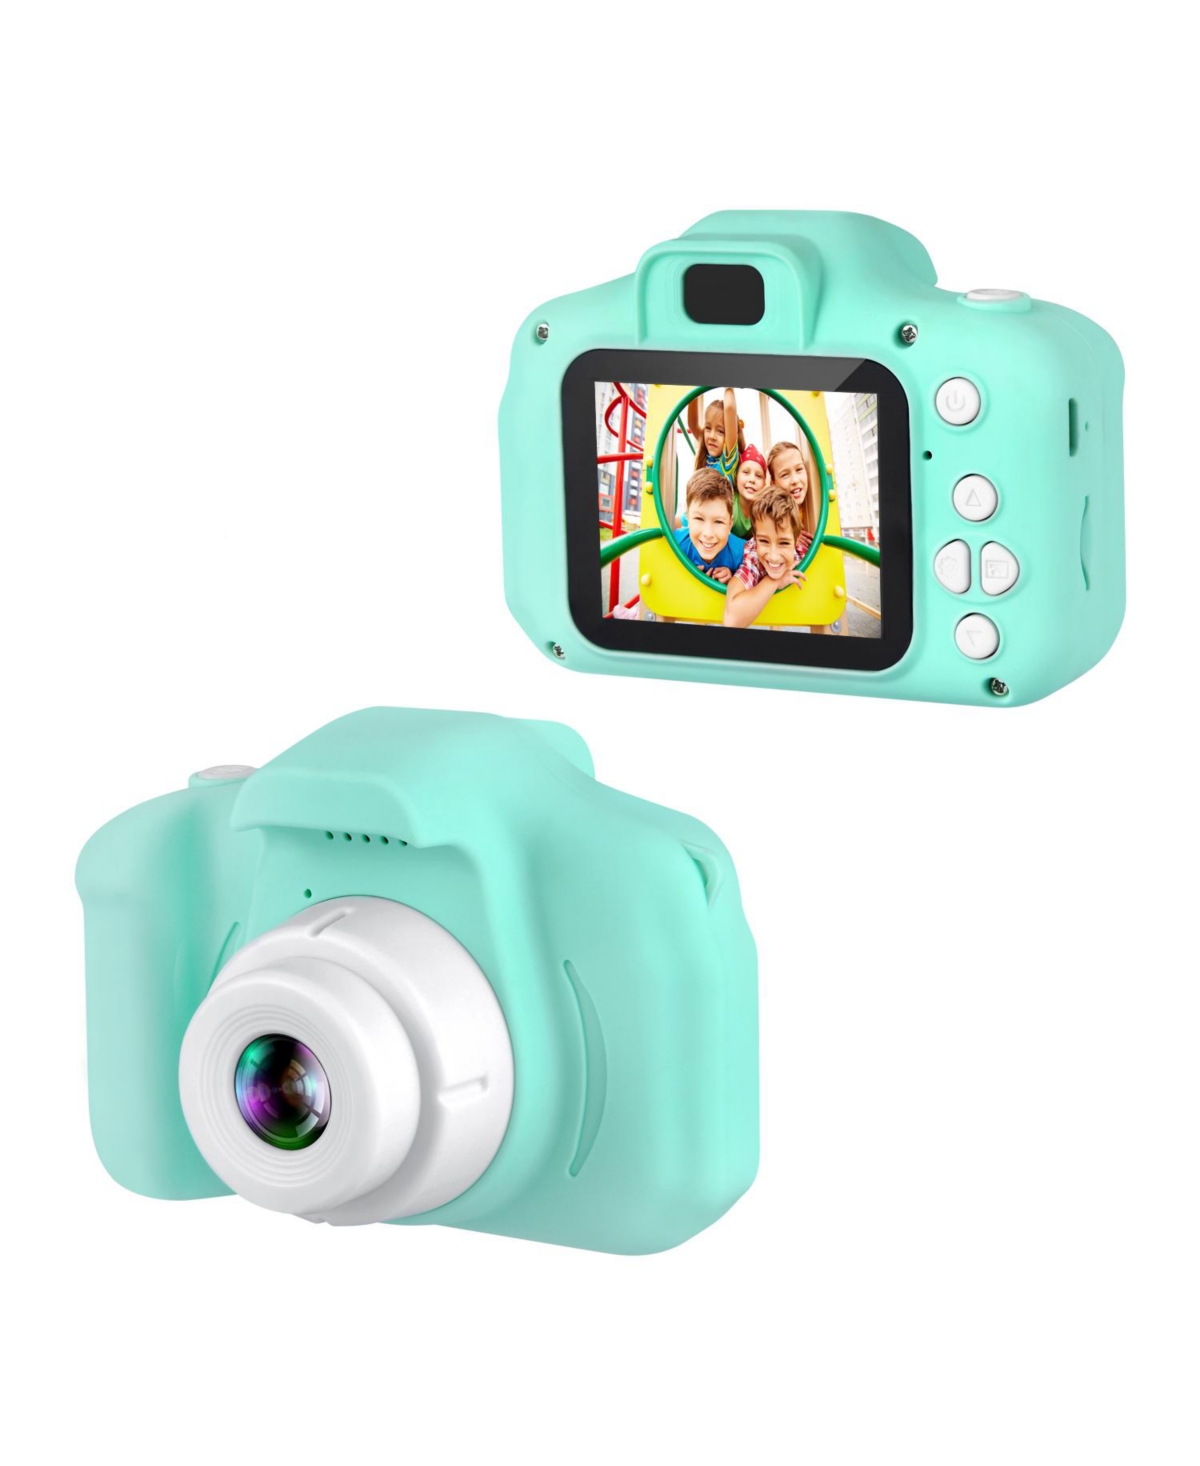 Dartwood 1080p Digital Camera For Kids With 2" Color Display Screen And Micro-sd Card Slot In Green